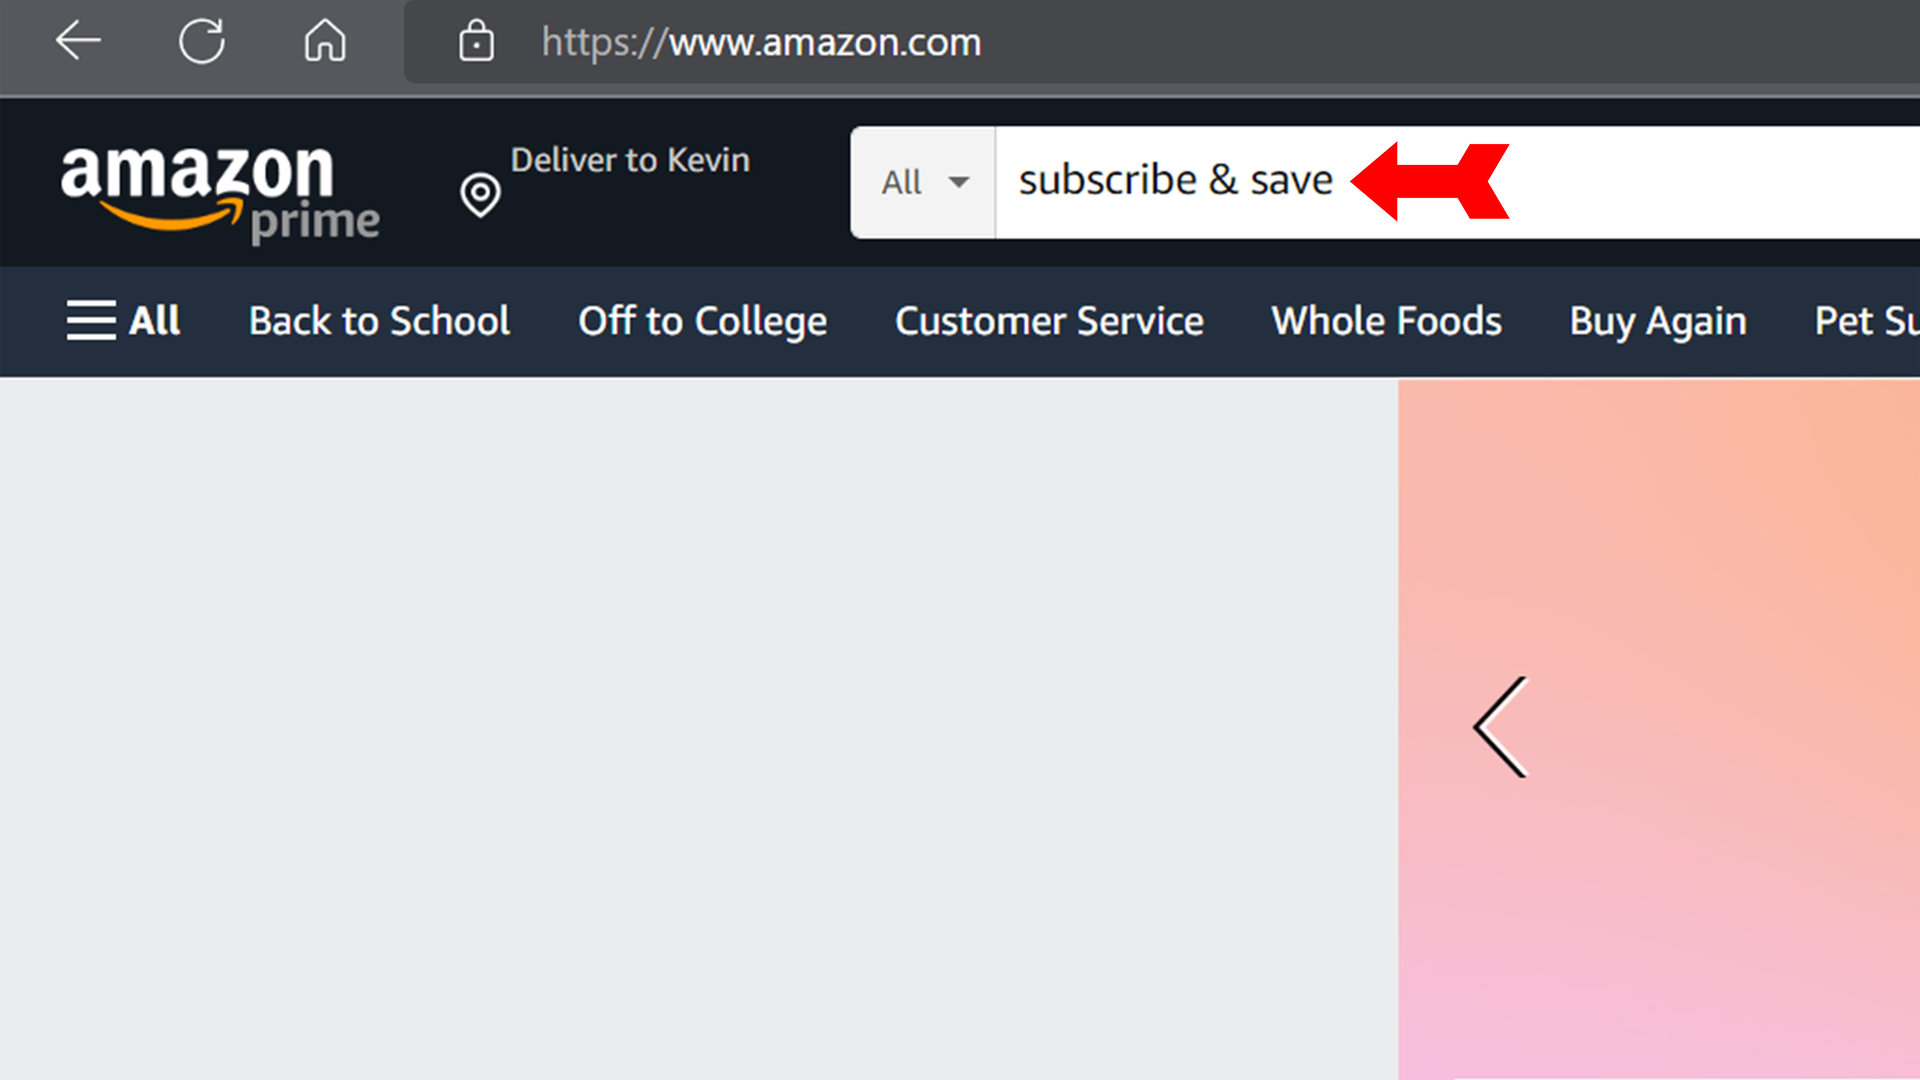 Cancel Subscribe and Save search terms